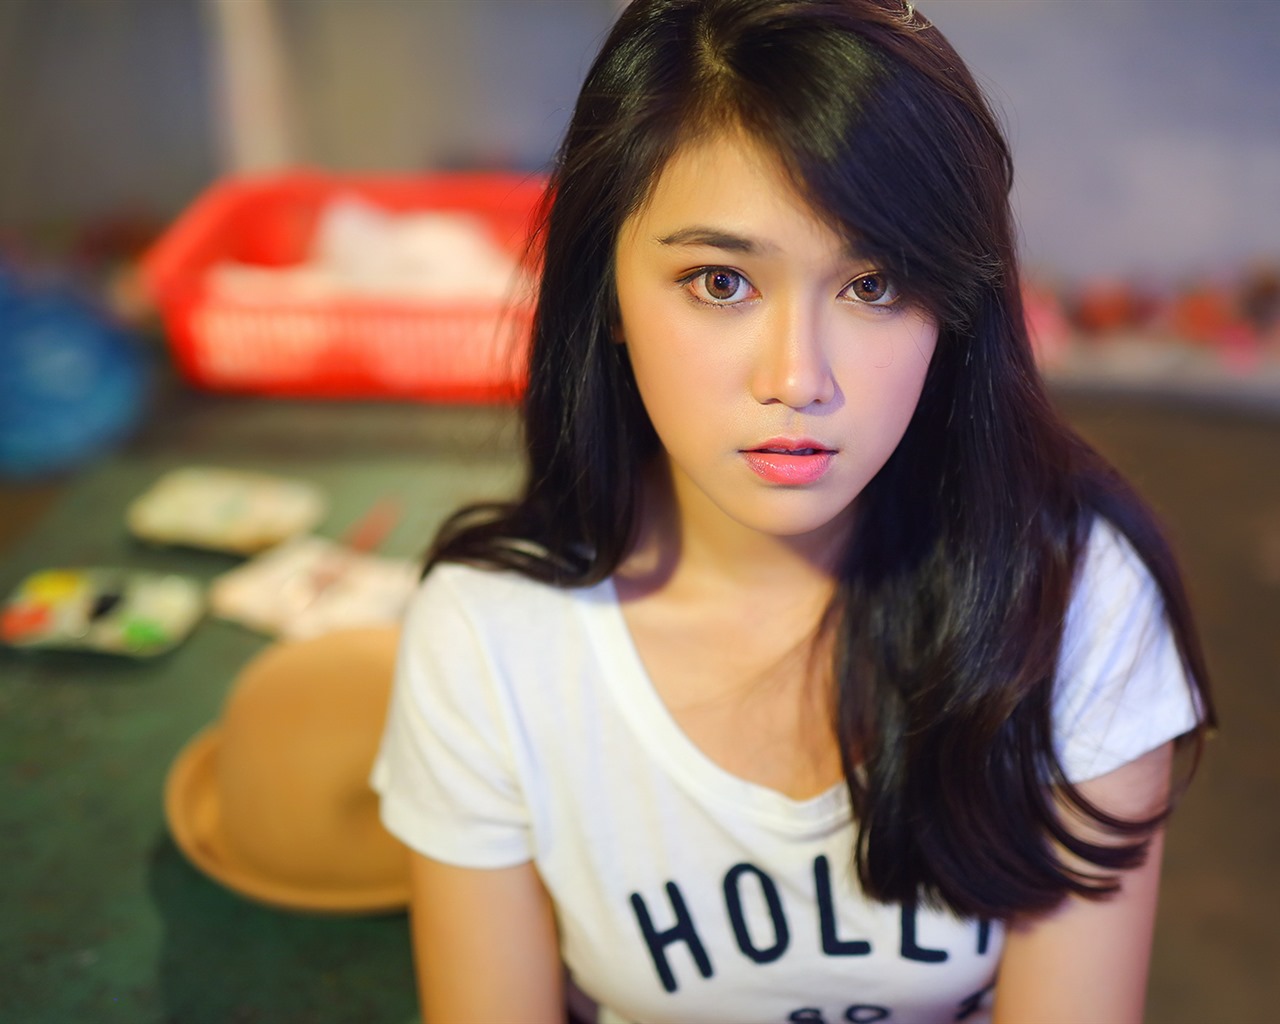 Pure and lovely young Asian girl HD wallpapers collection (3) #40 - 1280x1024